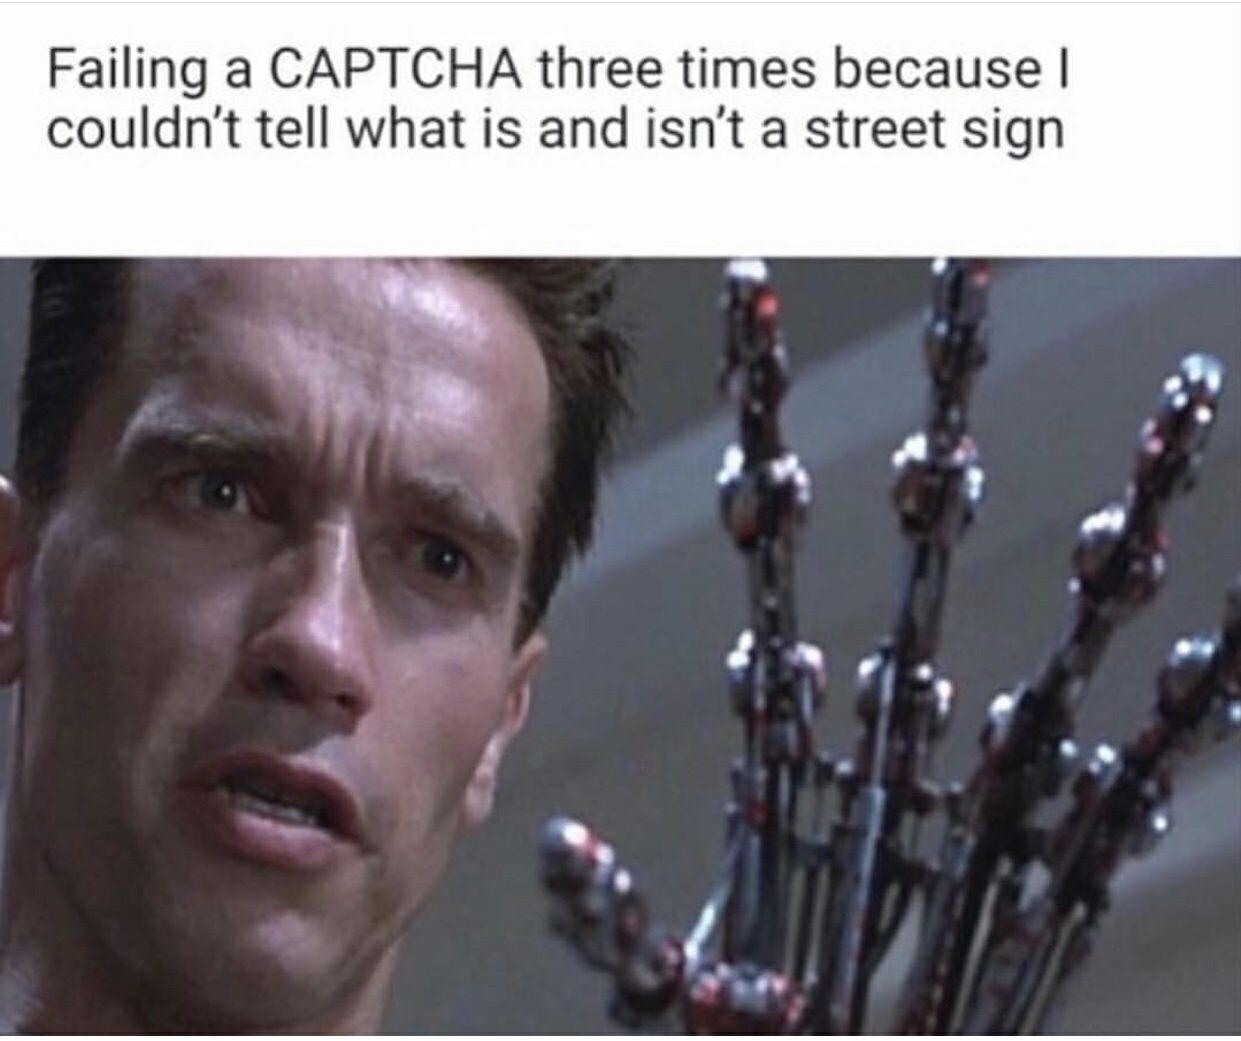 memes  - terminator meme - Failing a Captcha three times because couldn't tell what is and isn't a street sign